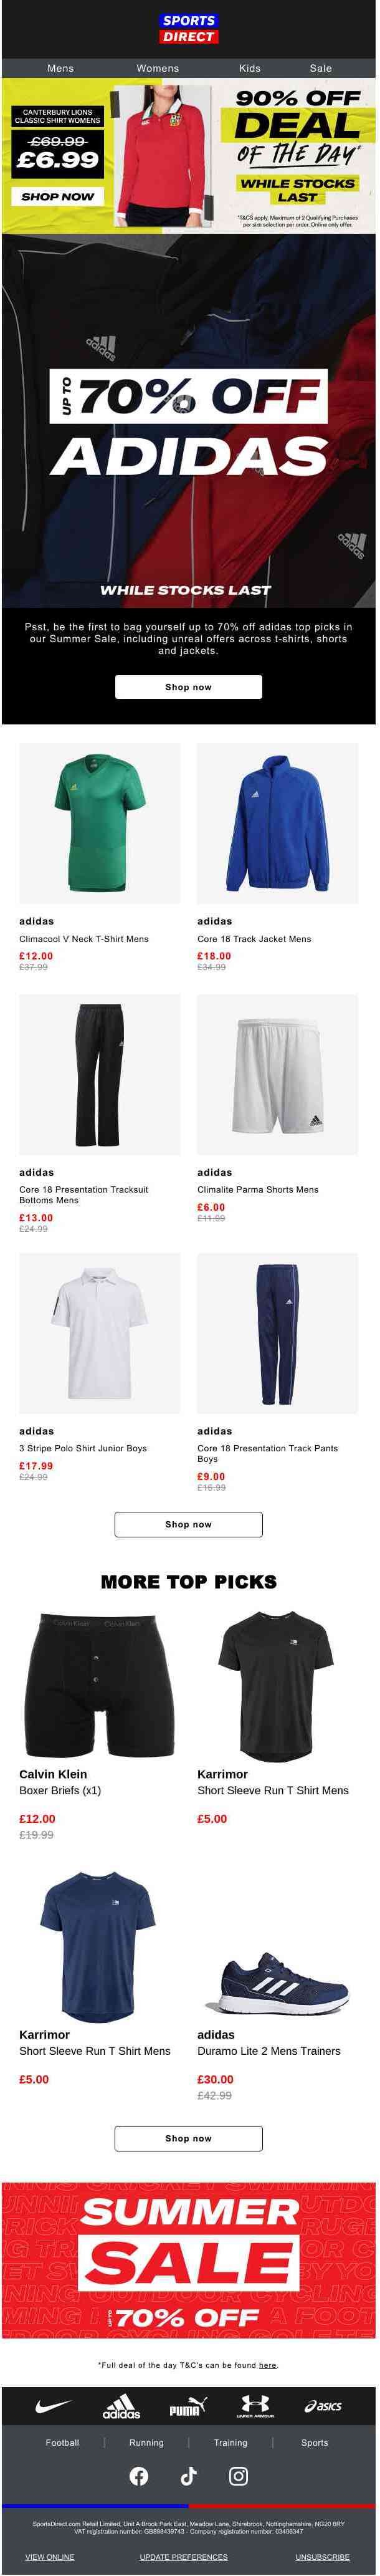 Up to 70% off adidas = MIND BLOWN 🤯